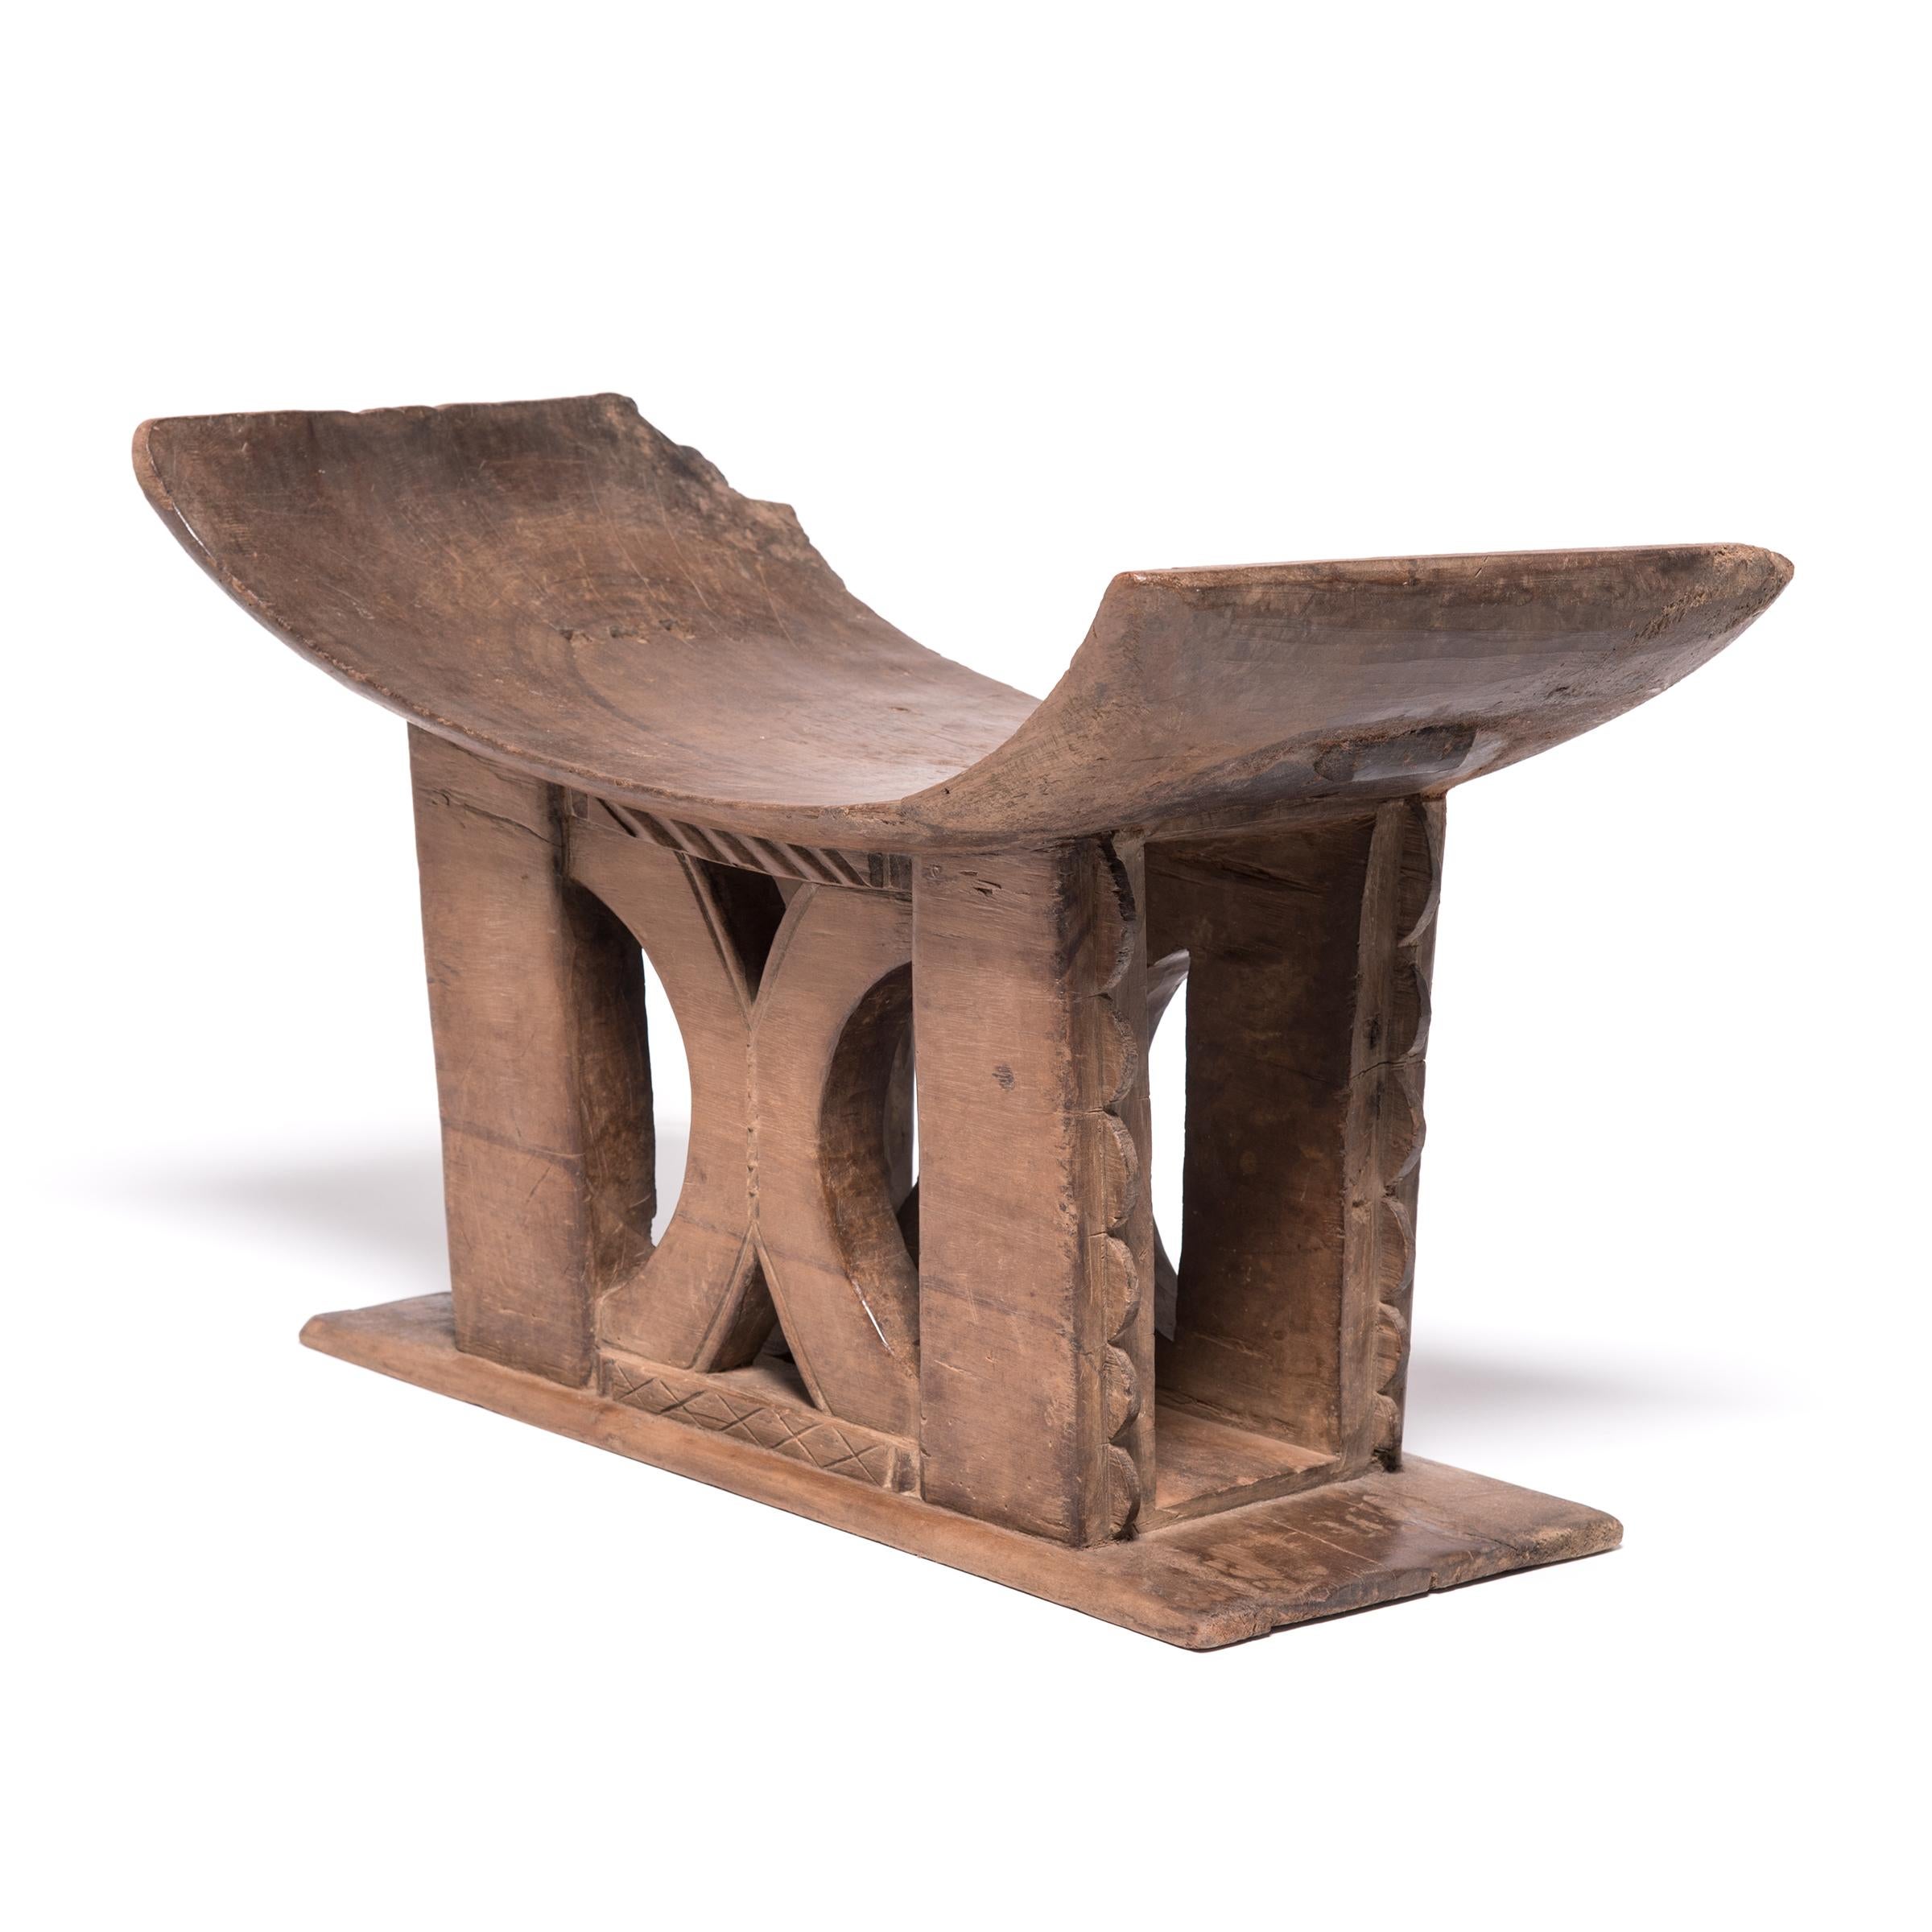 In traditional Ashanti culture, stools indicated power, status, and lines of succession. The flat base, curved seat, and ridged supports of this hand-carved stool reference the Ashanti King Stool. The central symbol is a simplified and turned